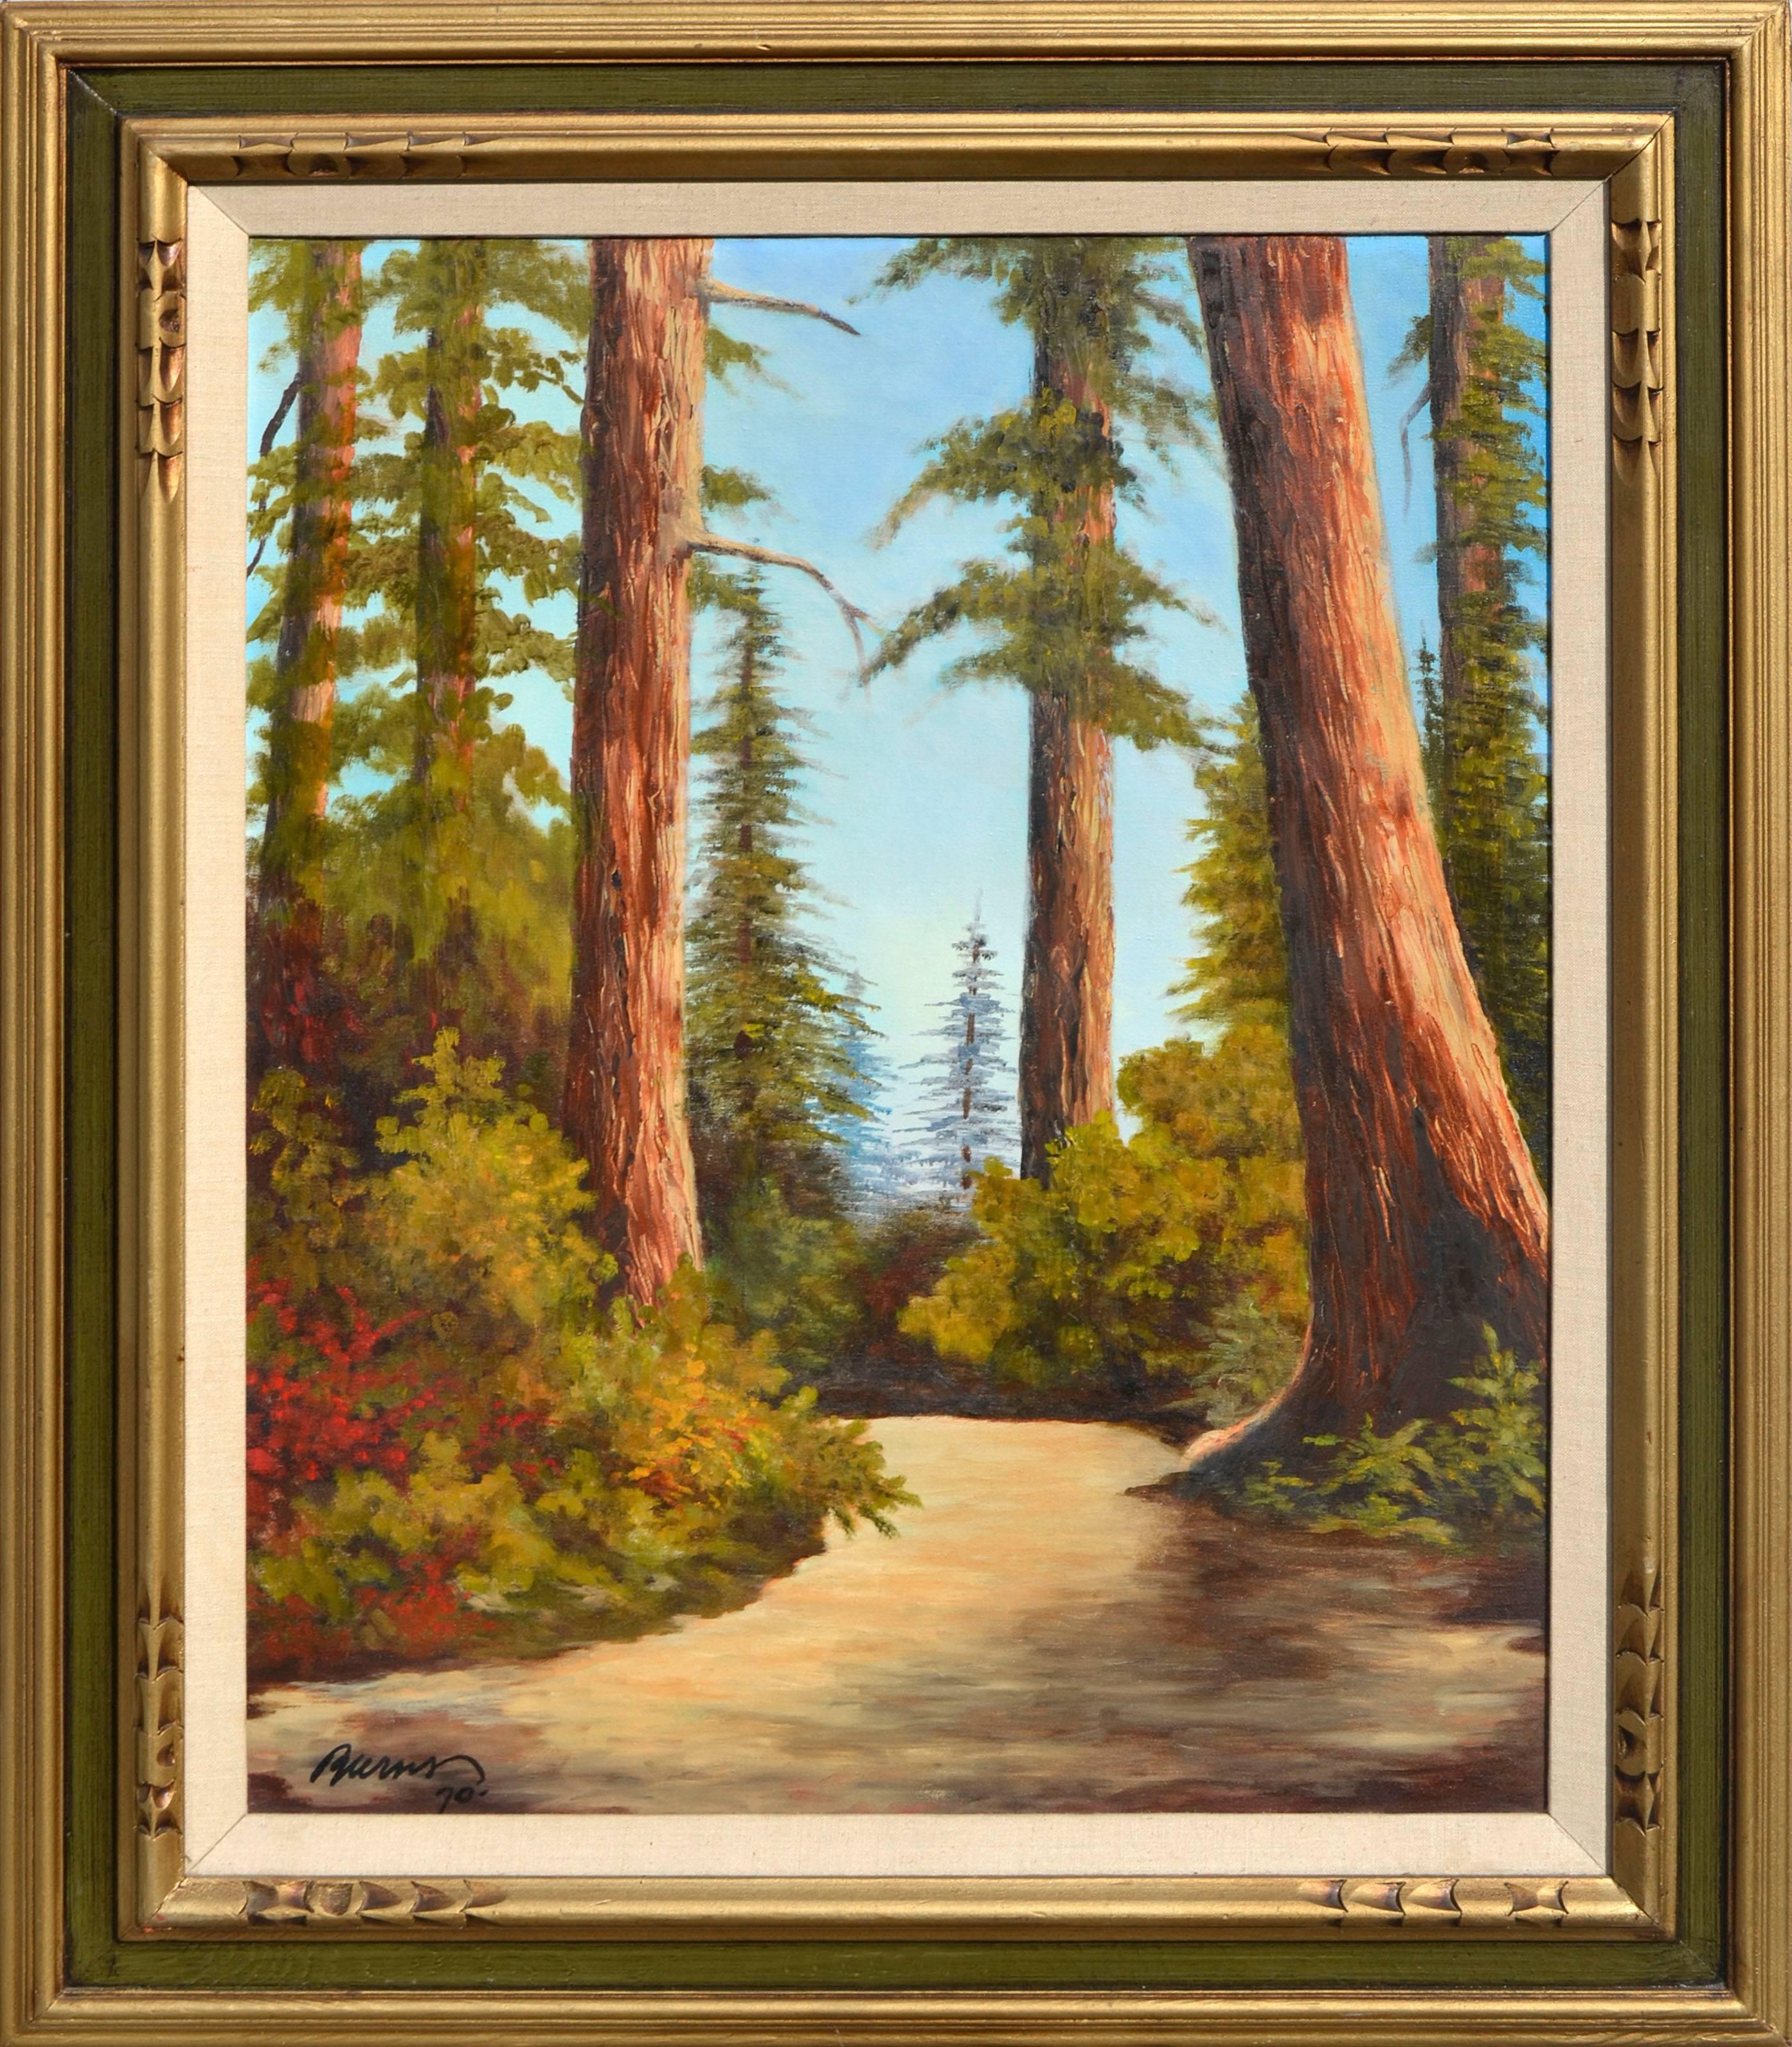 Beautiful oil painting of a trail through the California redwoods. Displayed in a period wood frame with linen liner. Signed and dated "Burns 70" lower left corner. Image, 30"H x 24"W.